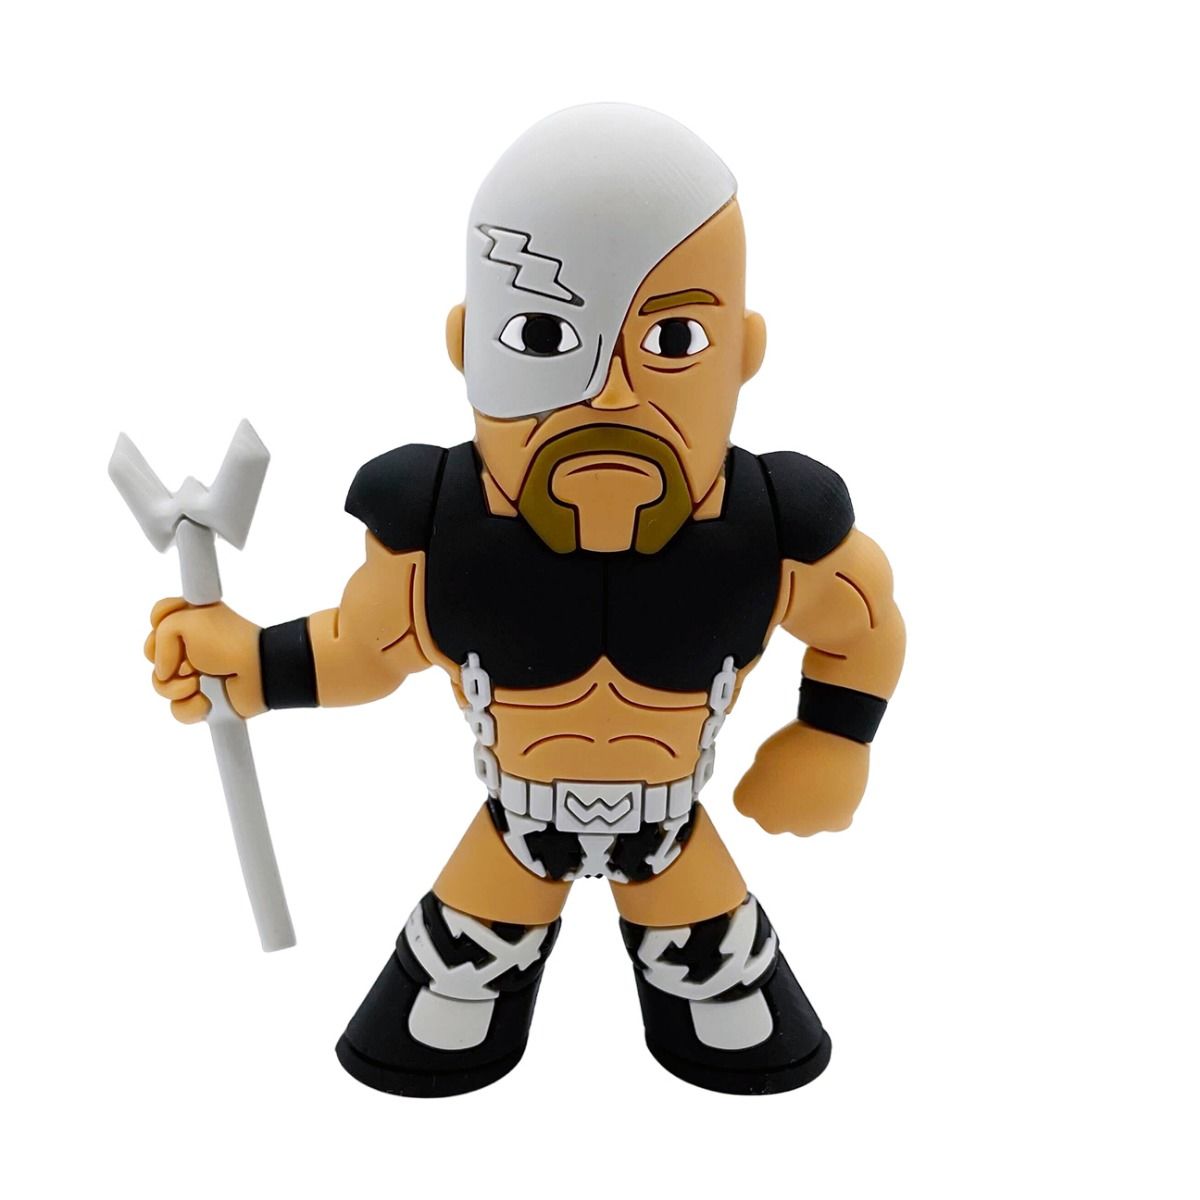 Pro Wrestling Tees Micro Brawlers Limited Edition Warlord